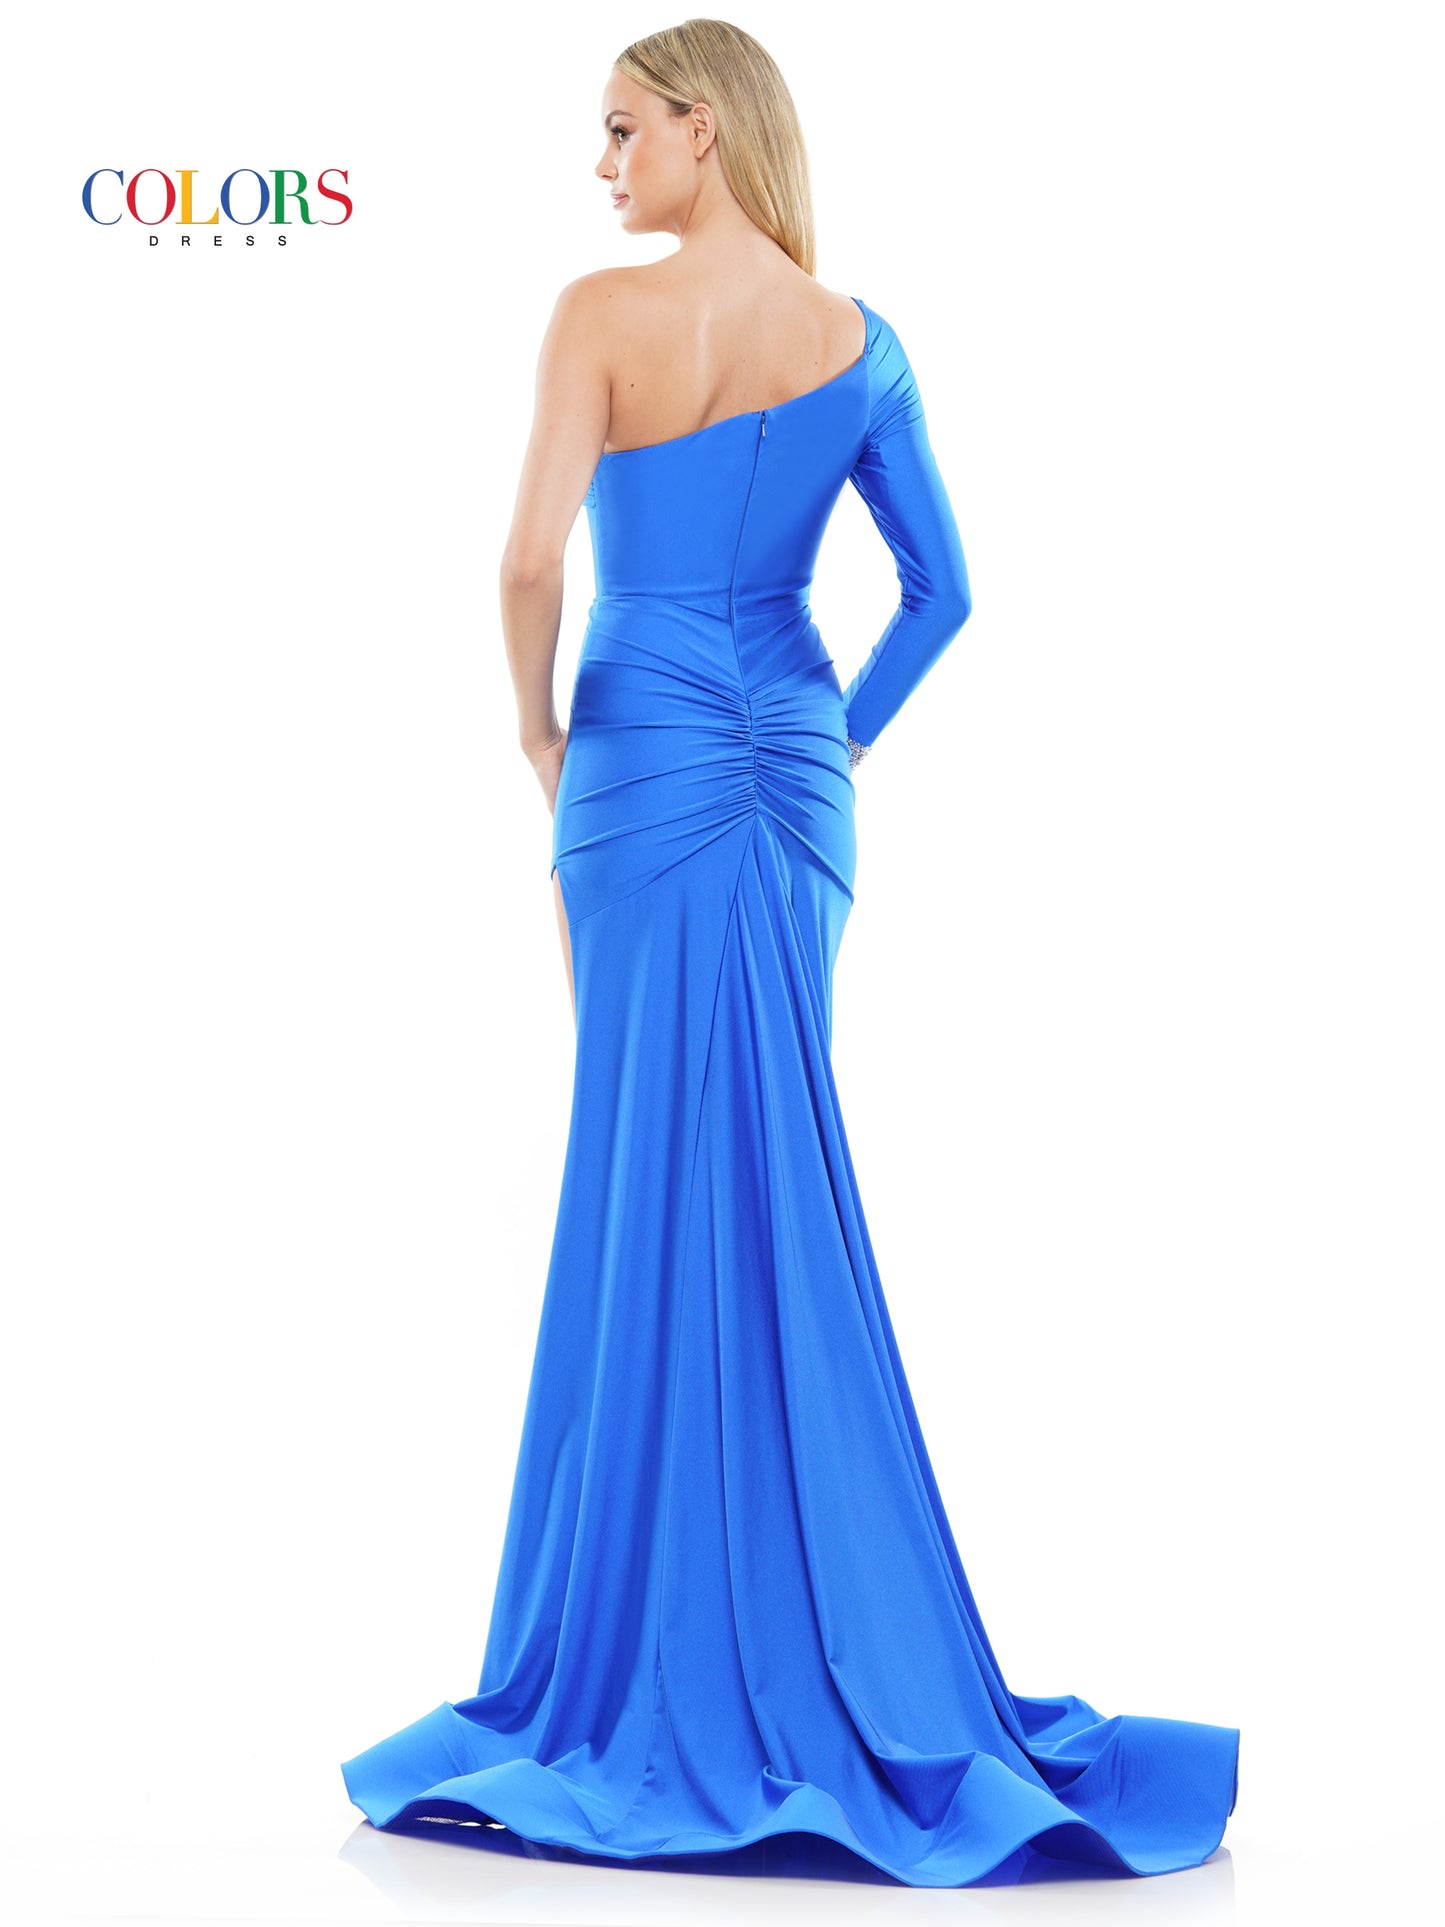 Prom Dresses Long Fitted One Shoulder Formal Prom Dress Royal